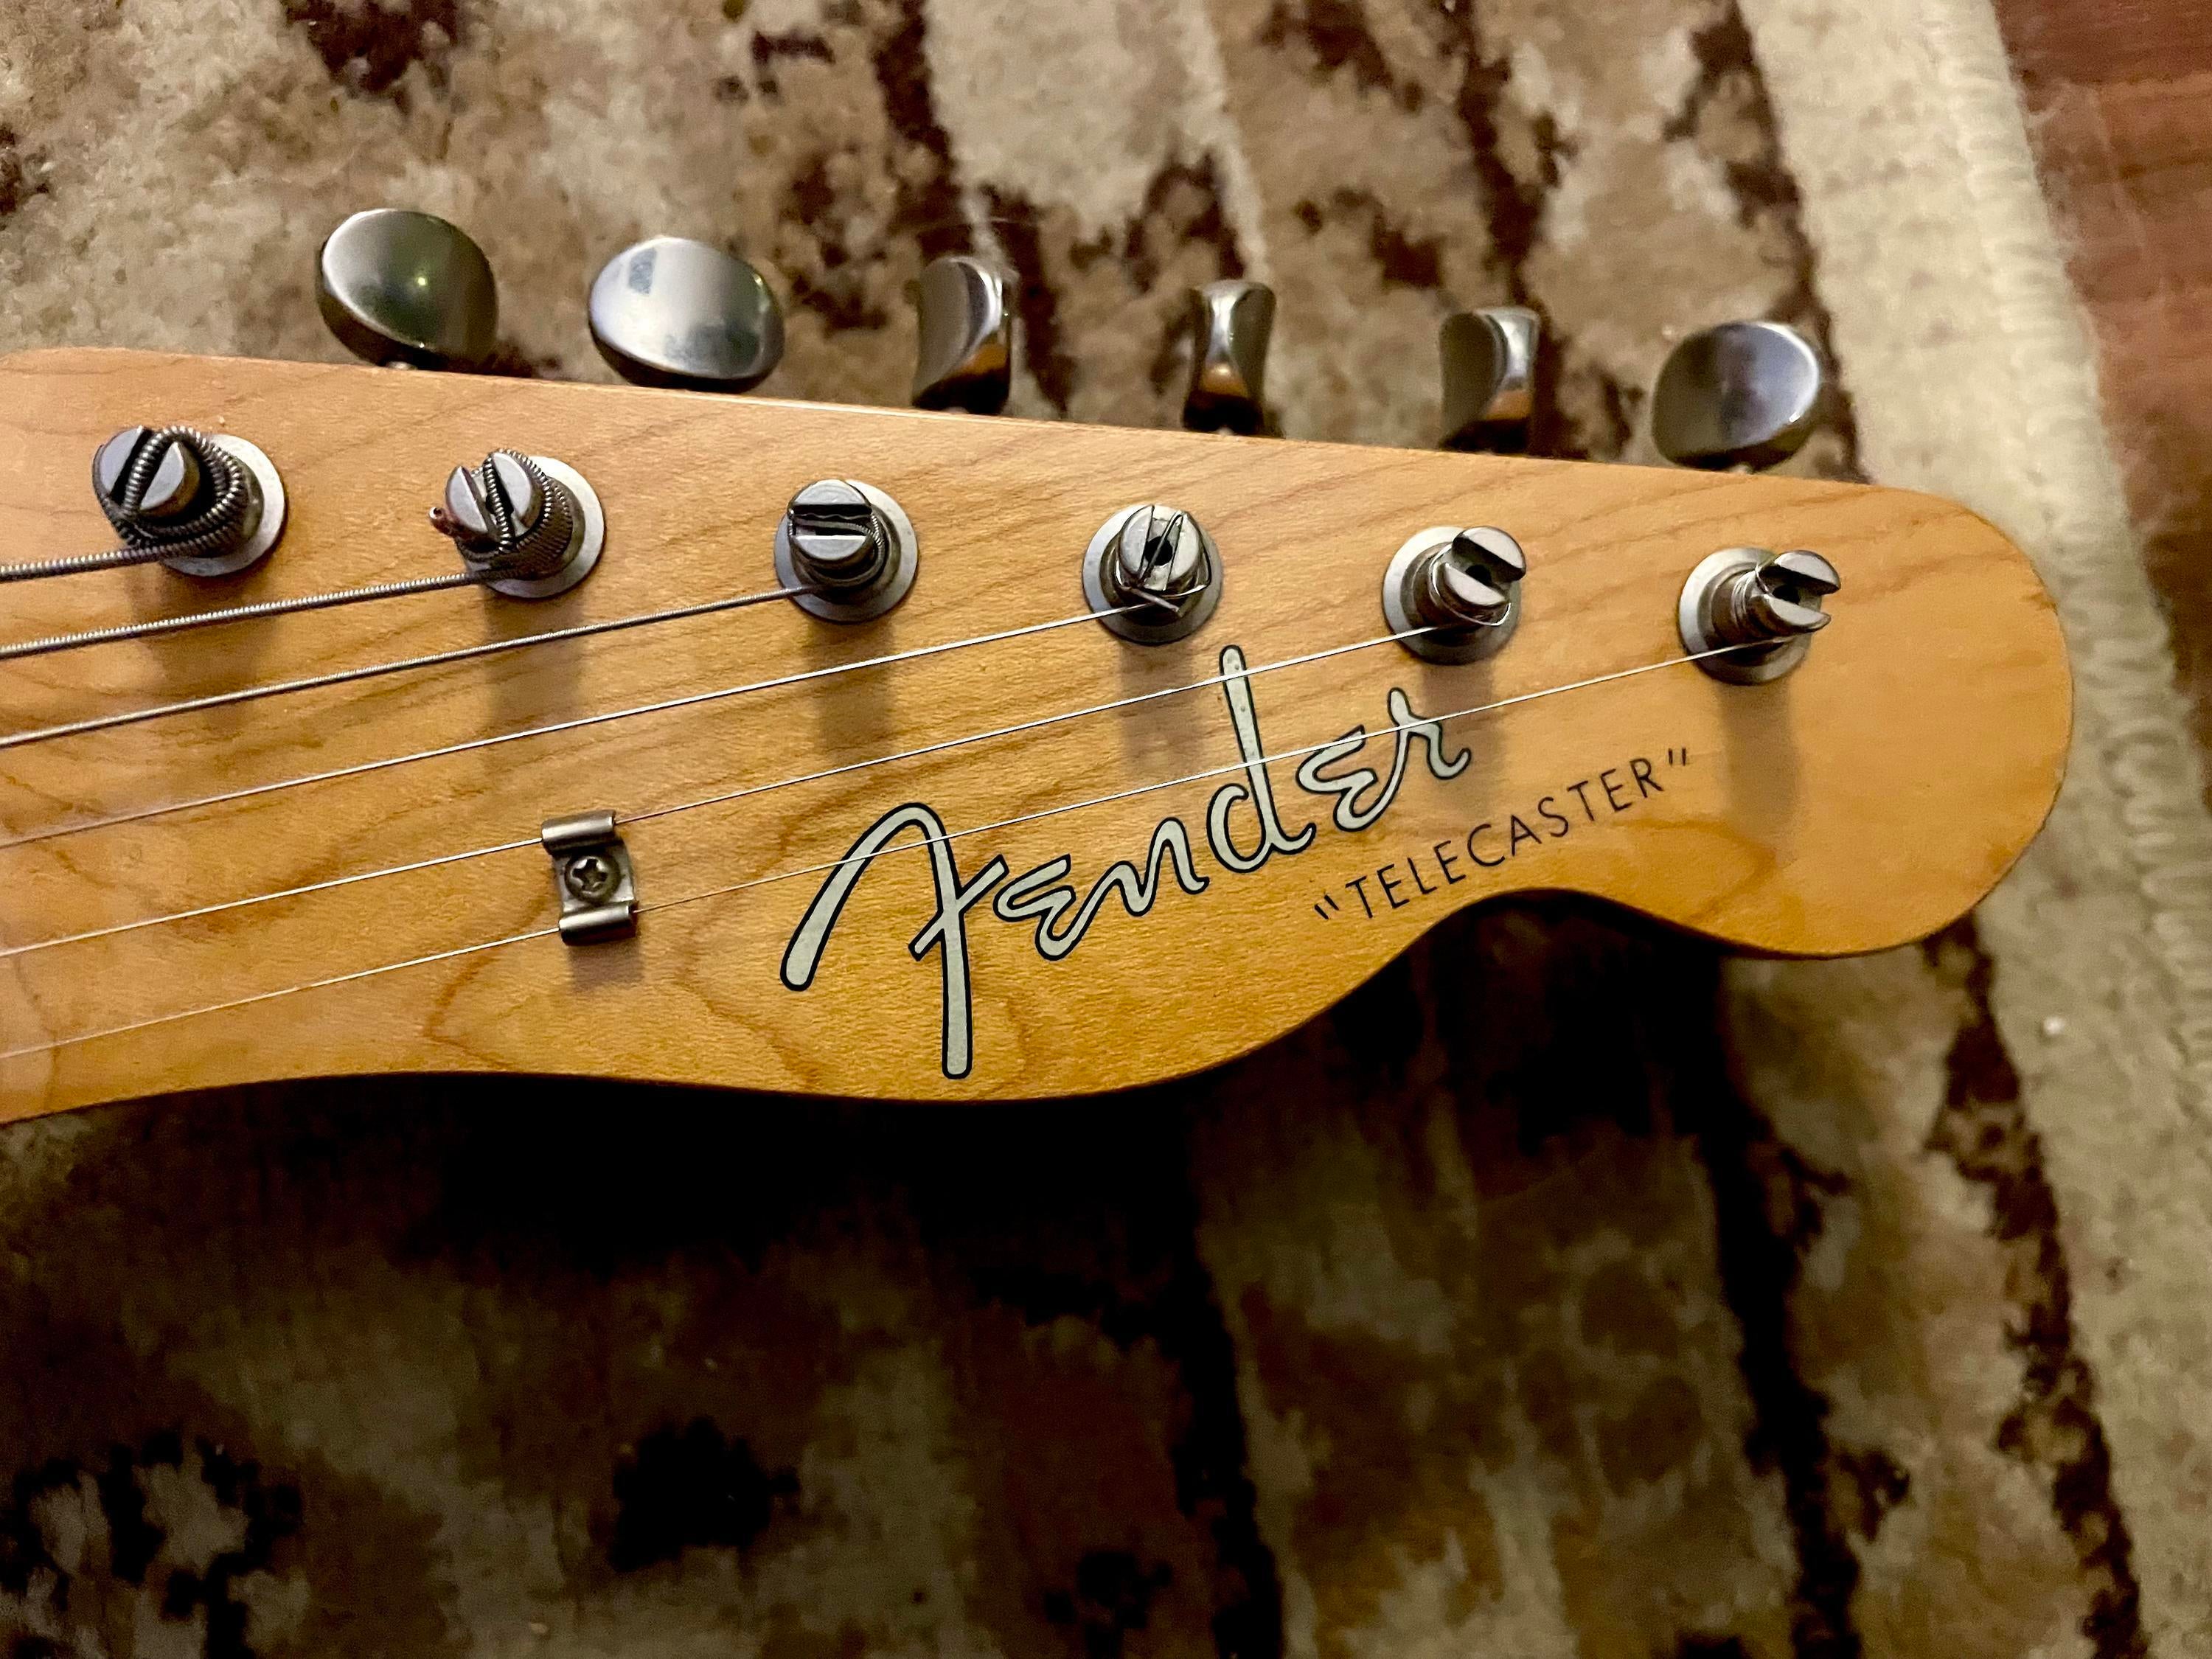 Used Fender 1985 Telecaster Guitar - - Sweetwater's Gear Exchange